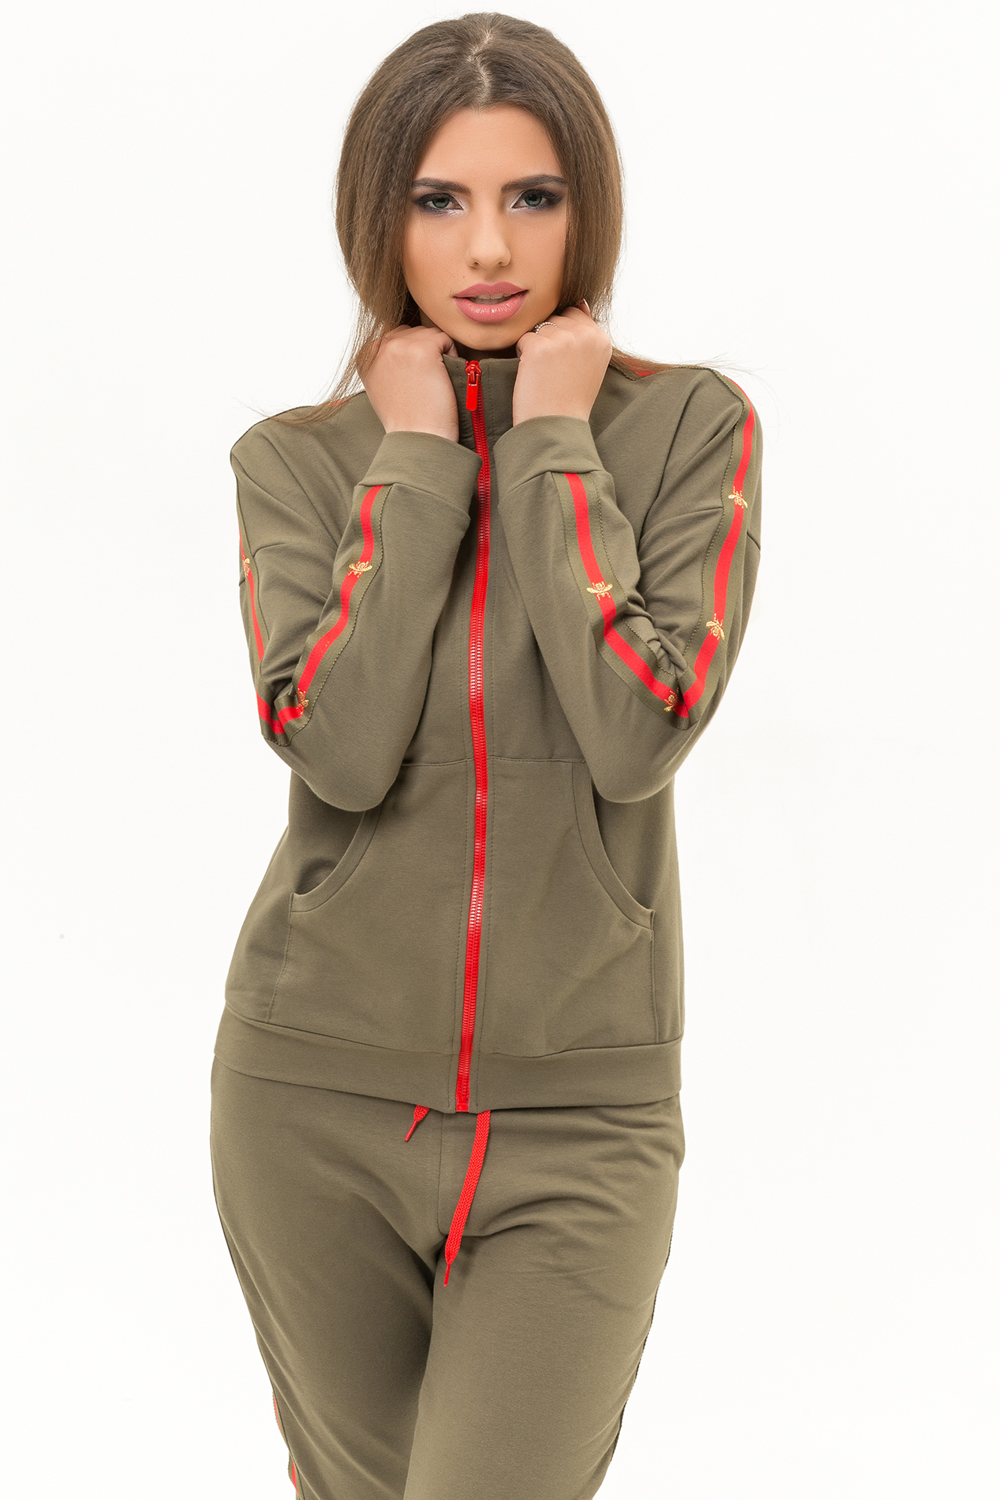 Tracksuit in khaki color